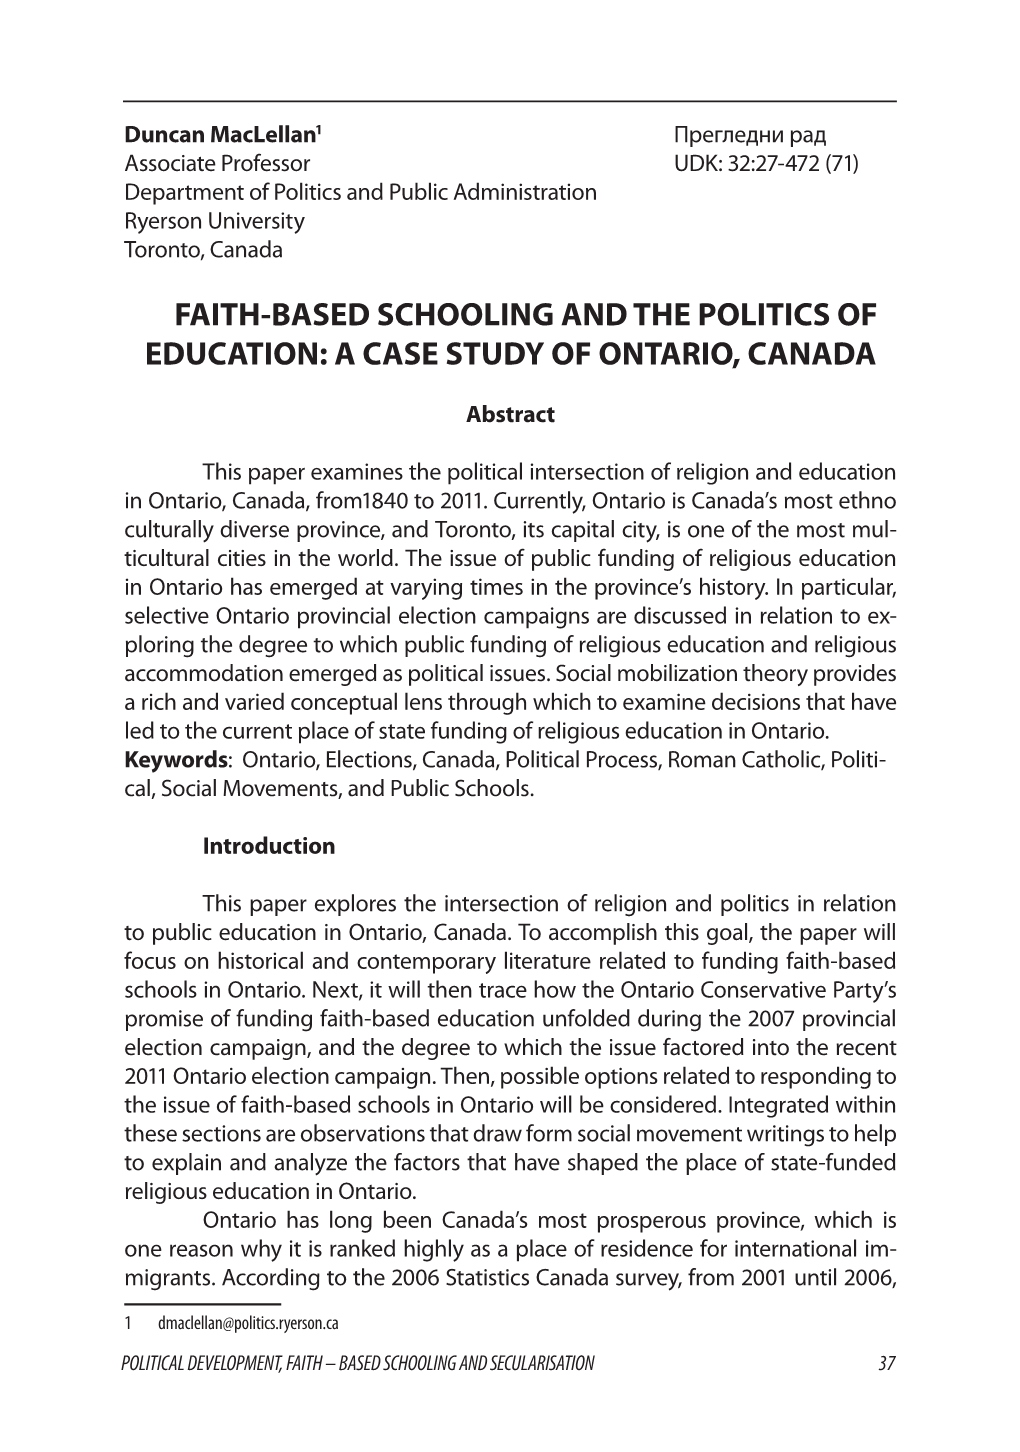 Faith-Based Schooling and the Politics of Education: a Case Study of Ontario, Canada